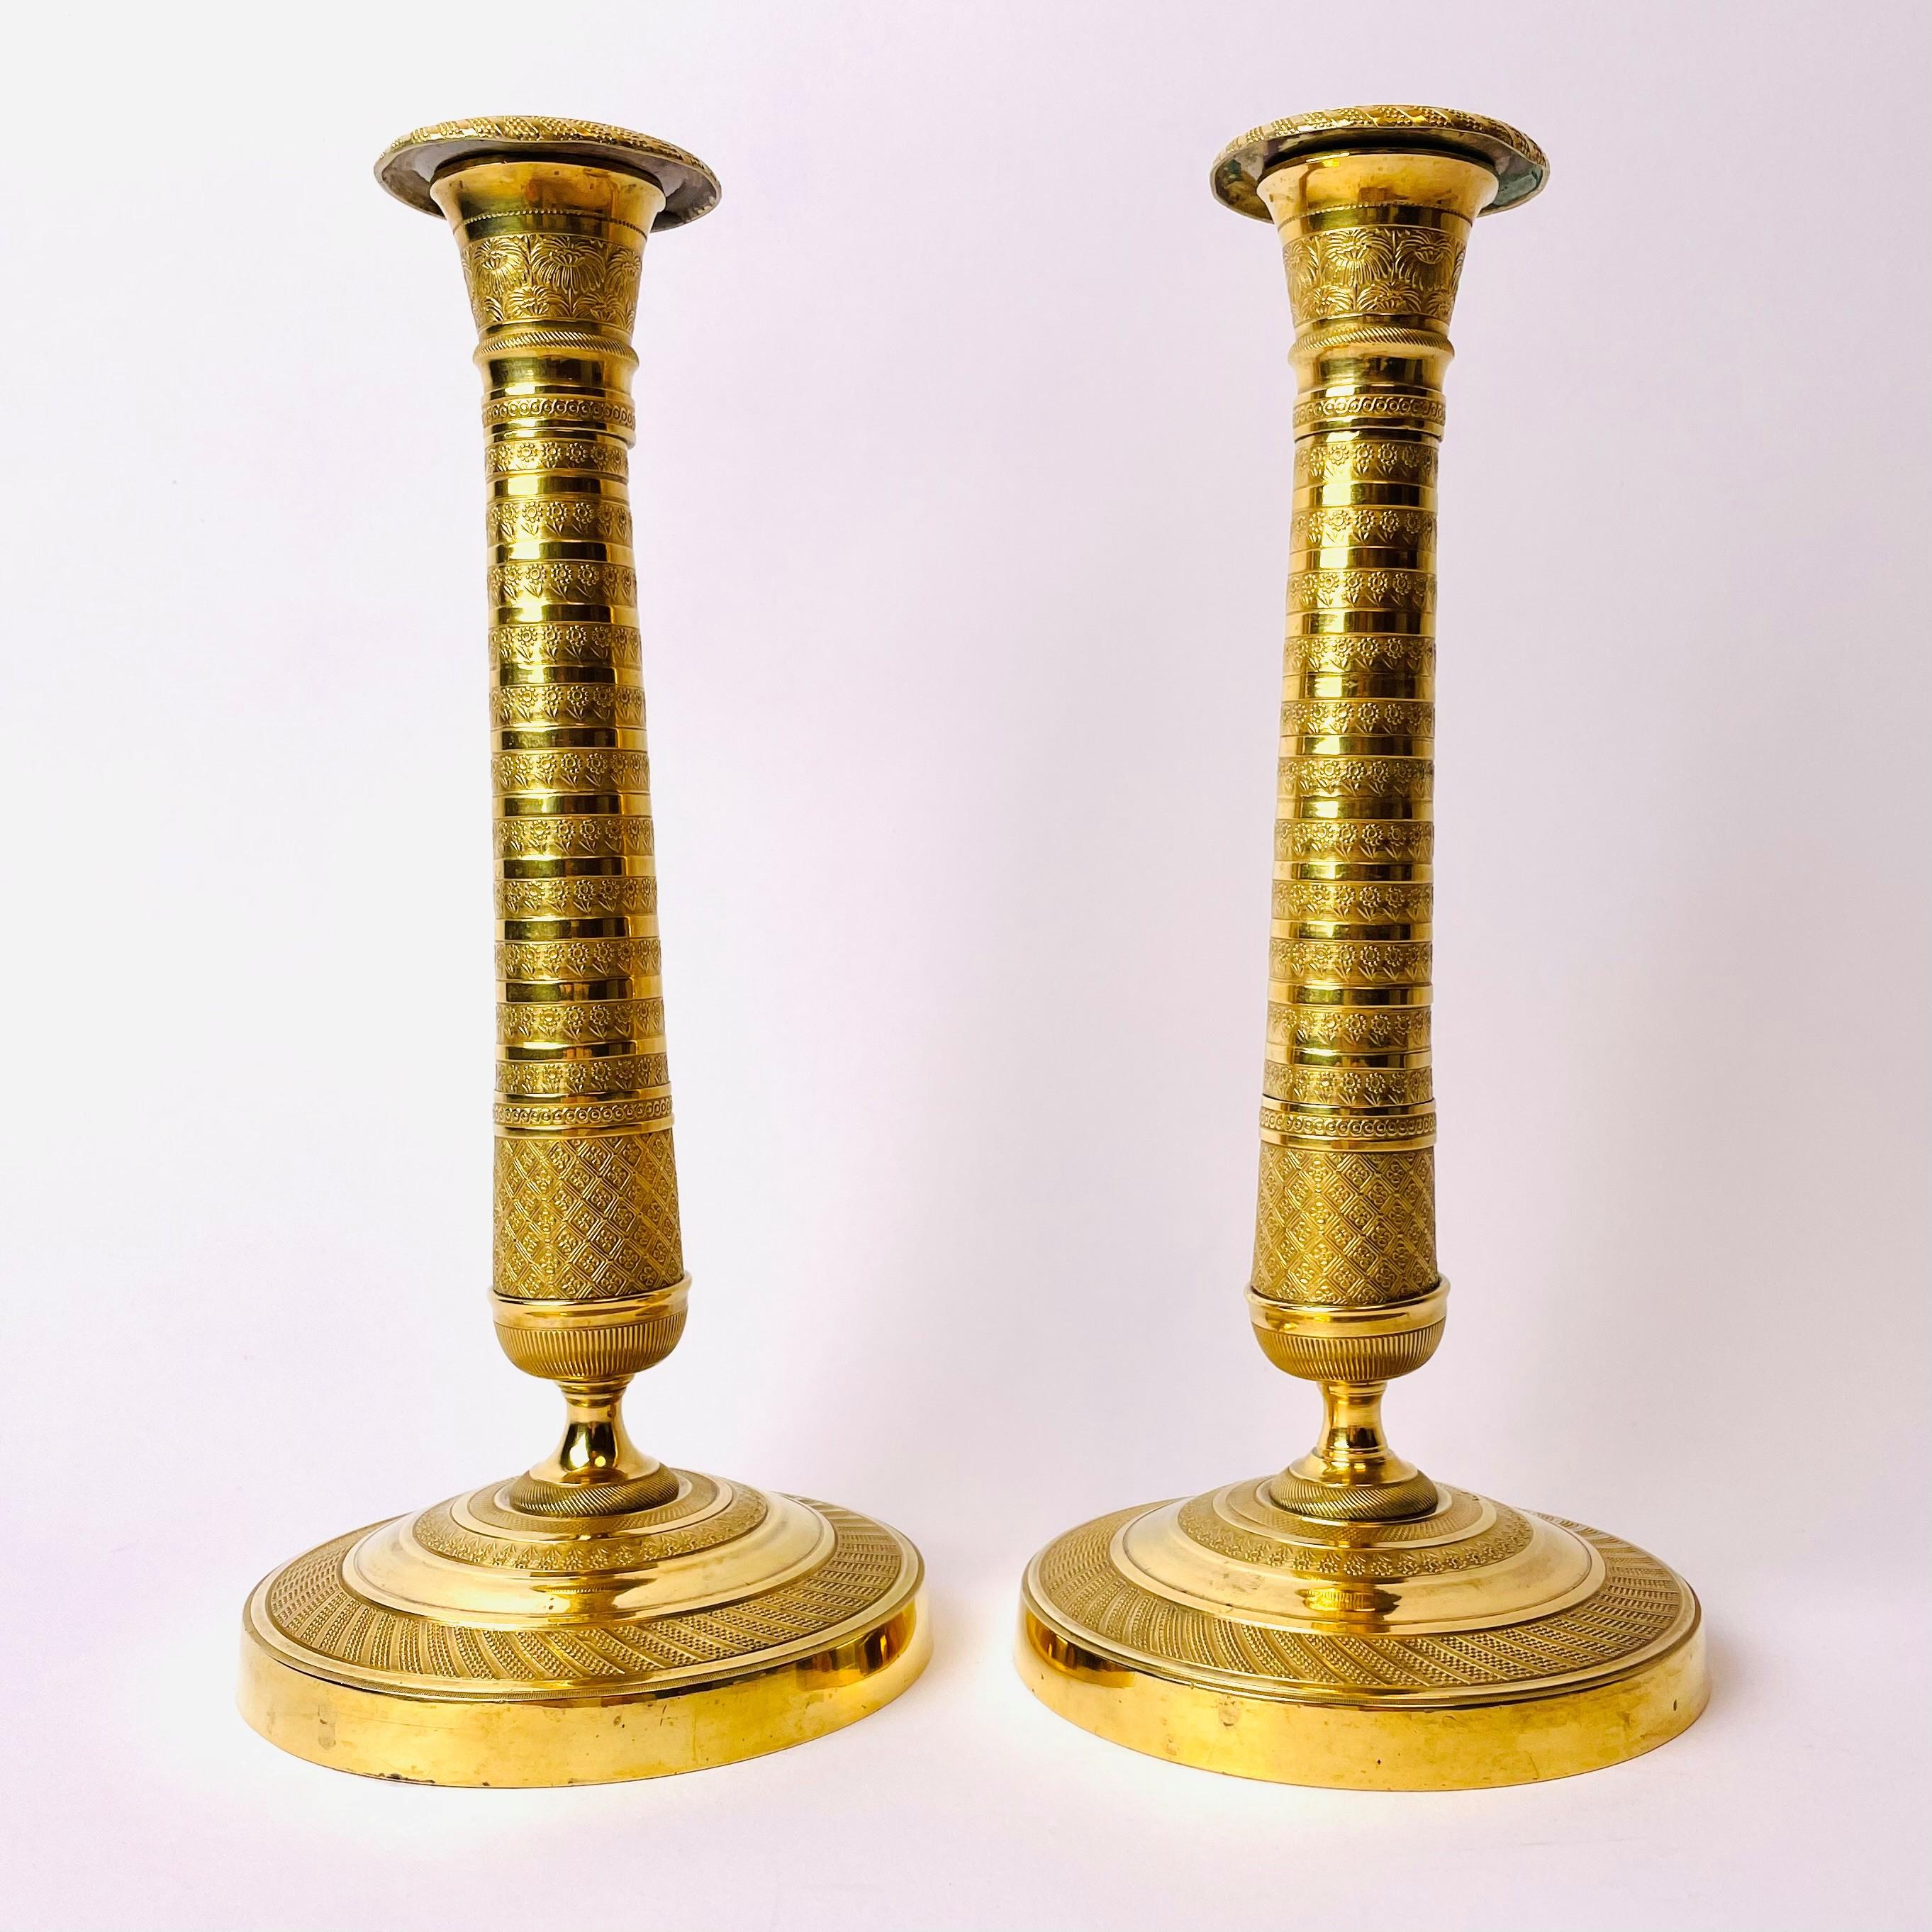 Excellent pair of early 19th century candlesticks in gilt bronze. These neoclassical Empire Candlesticks are made in France, circa 1820. Unusual model with stripes and beautifully stylized floral decorations.

Wear consistent with age and use.